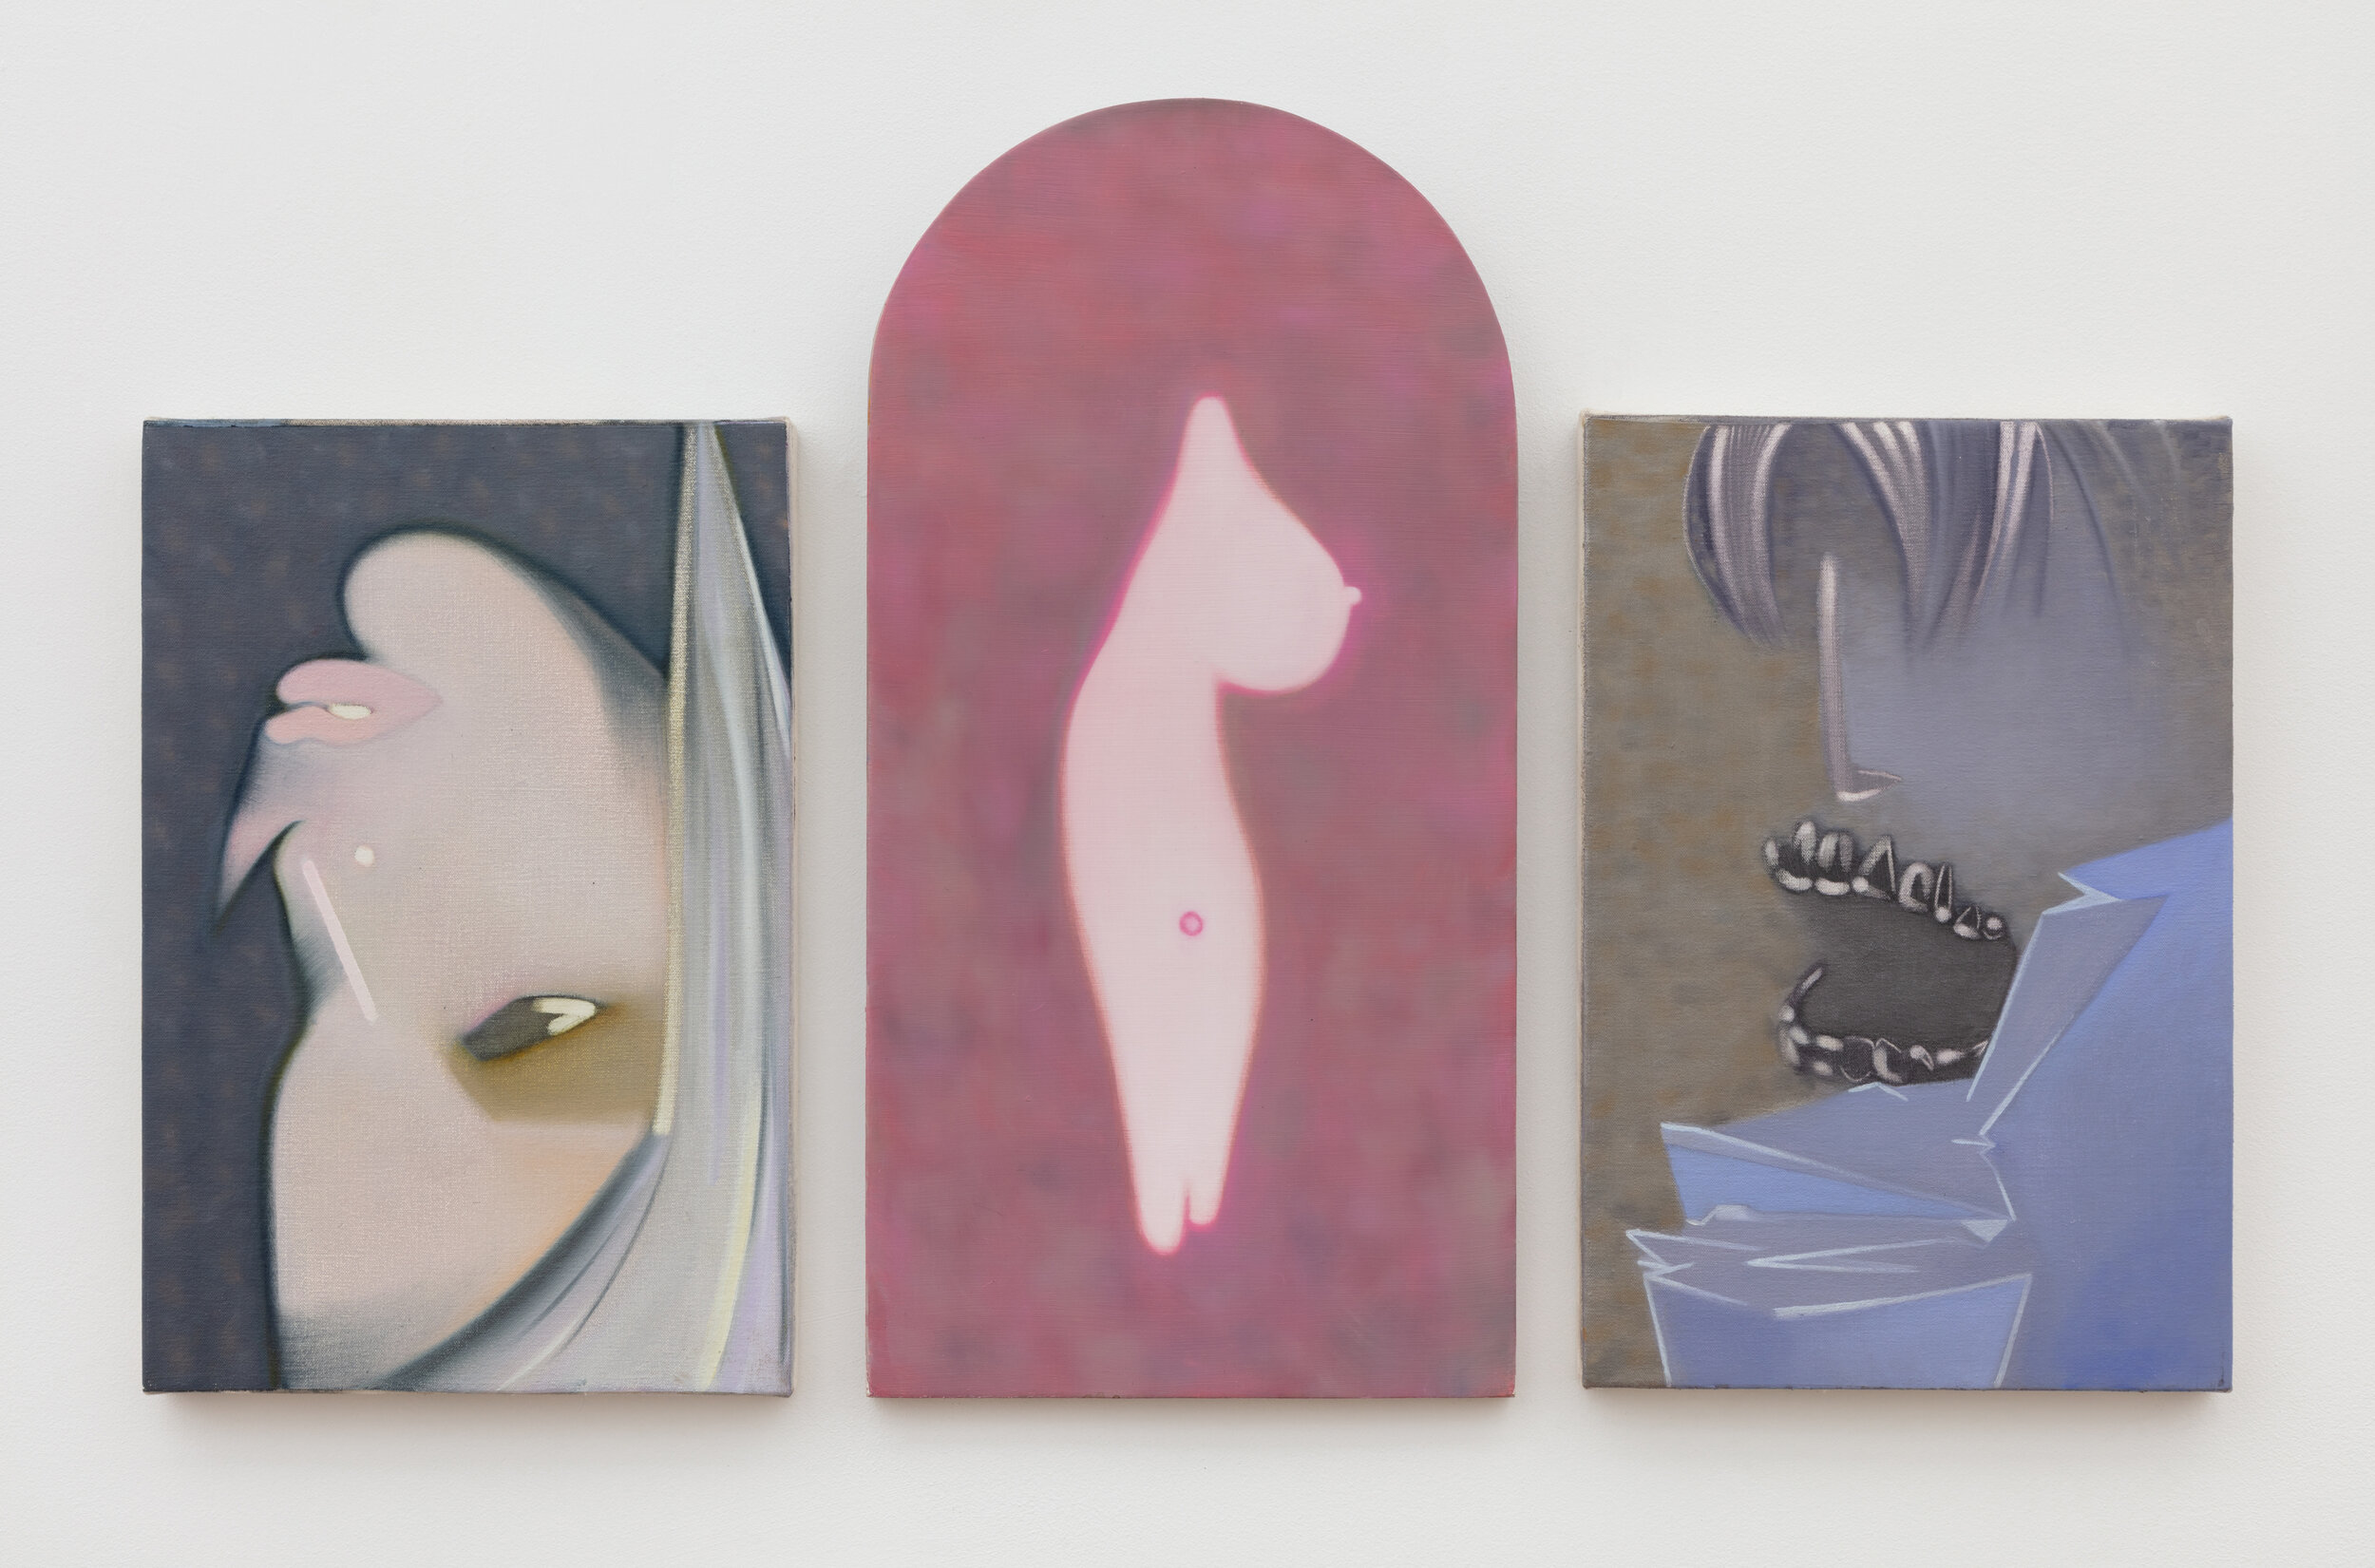  Kevin Tobin,  American Princess,  2019. Oil on canvas and cut birch. Three panels: 16 x 12 inches; 24 x 12 inches; 16 x 12 inches.  